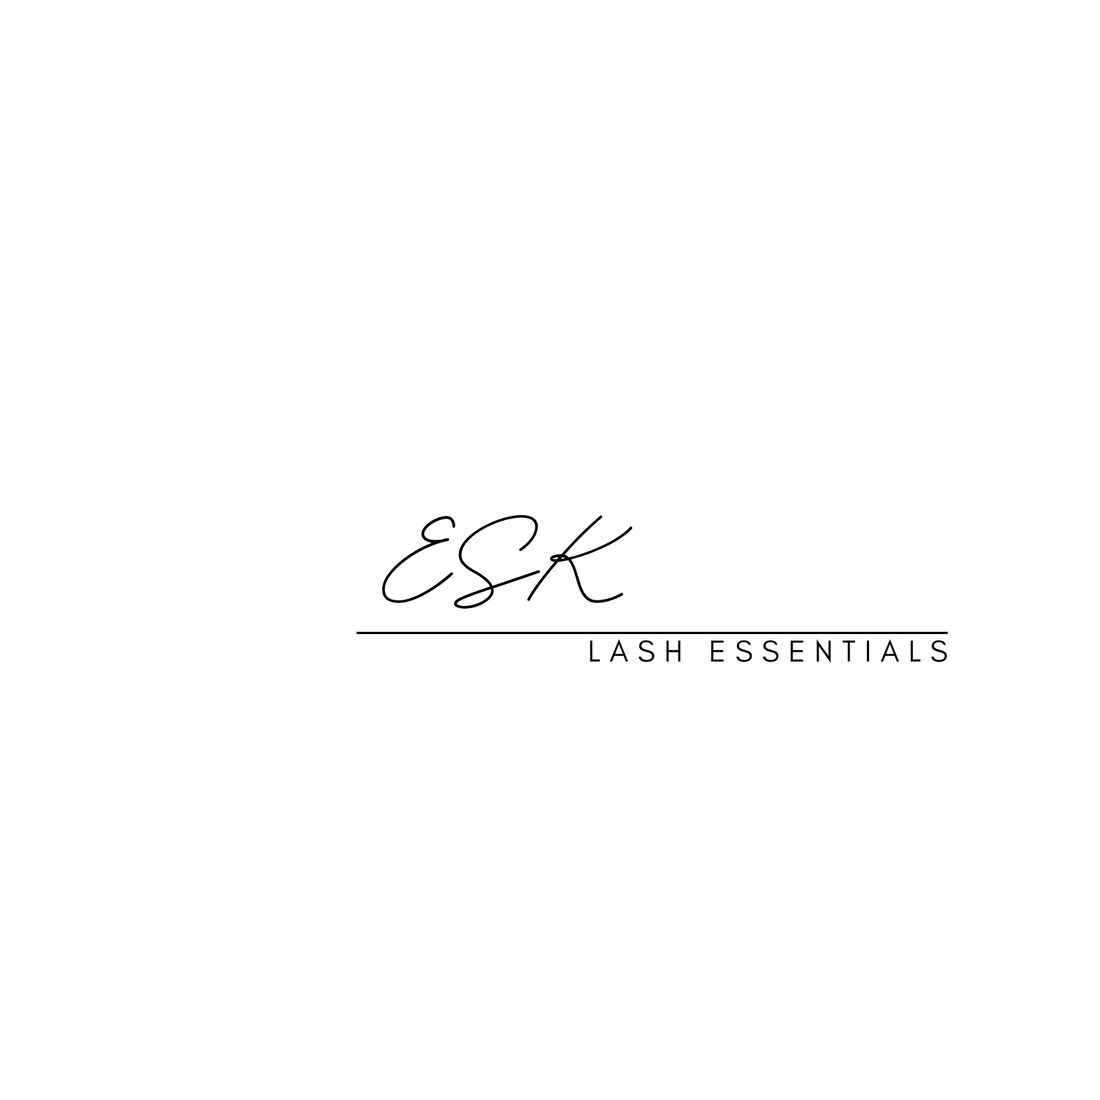 ESK Pro-Made Fans Revolution! ESK eyelash extension products and supplies 8/9/23 6:38pm